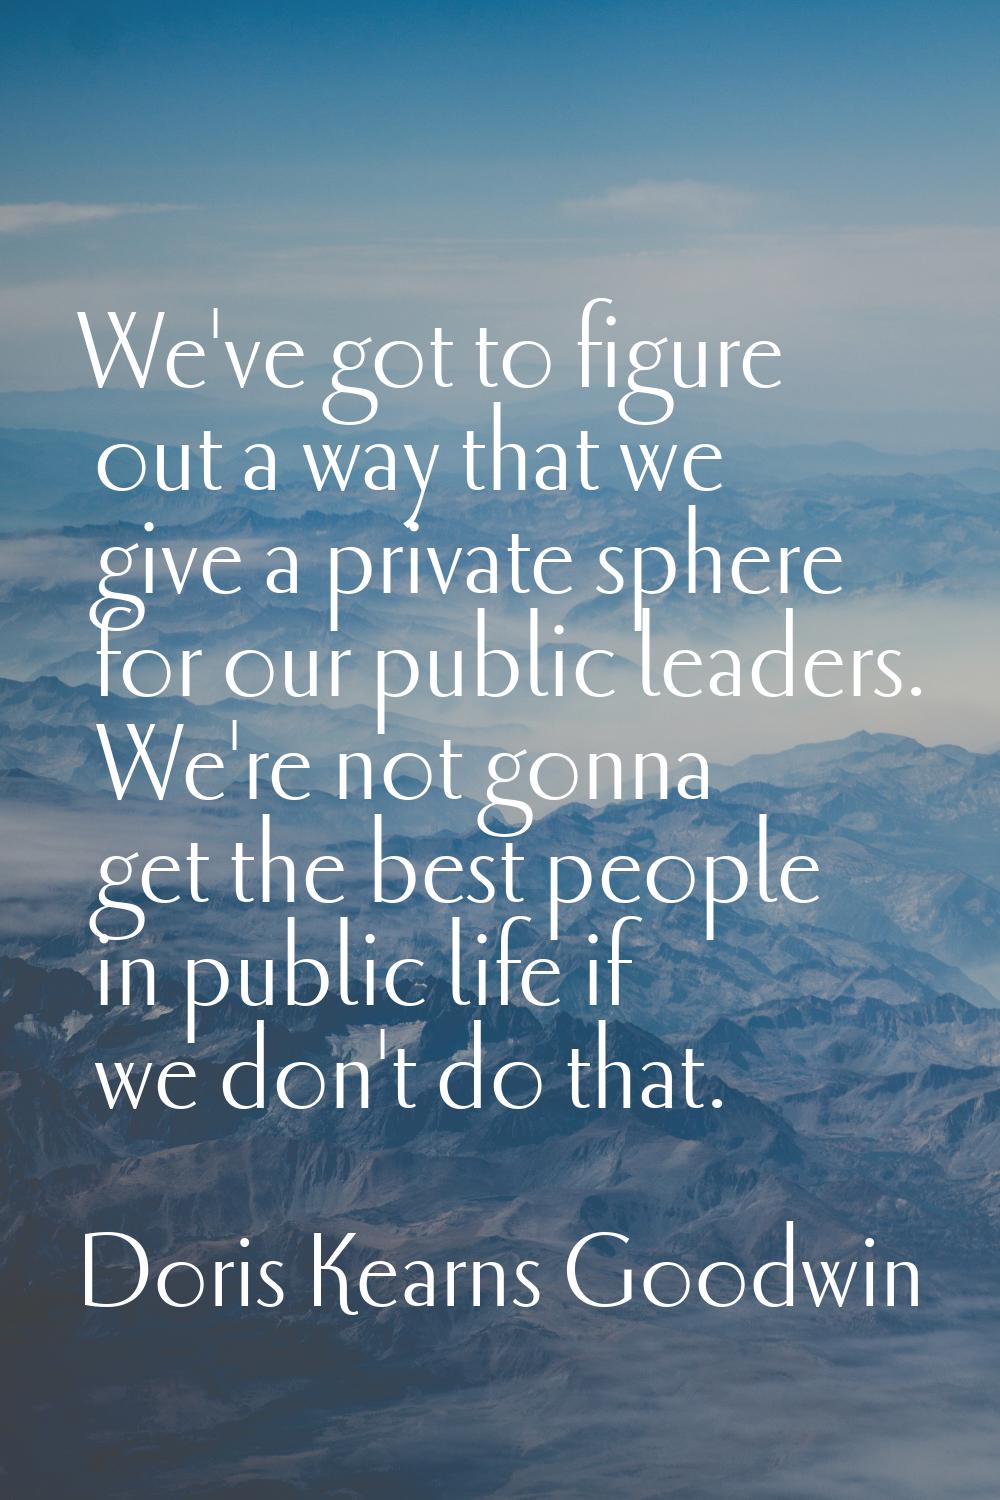 We've got to figure out a way that we give a private sphere for our public leaders. We're not gonna